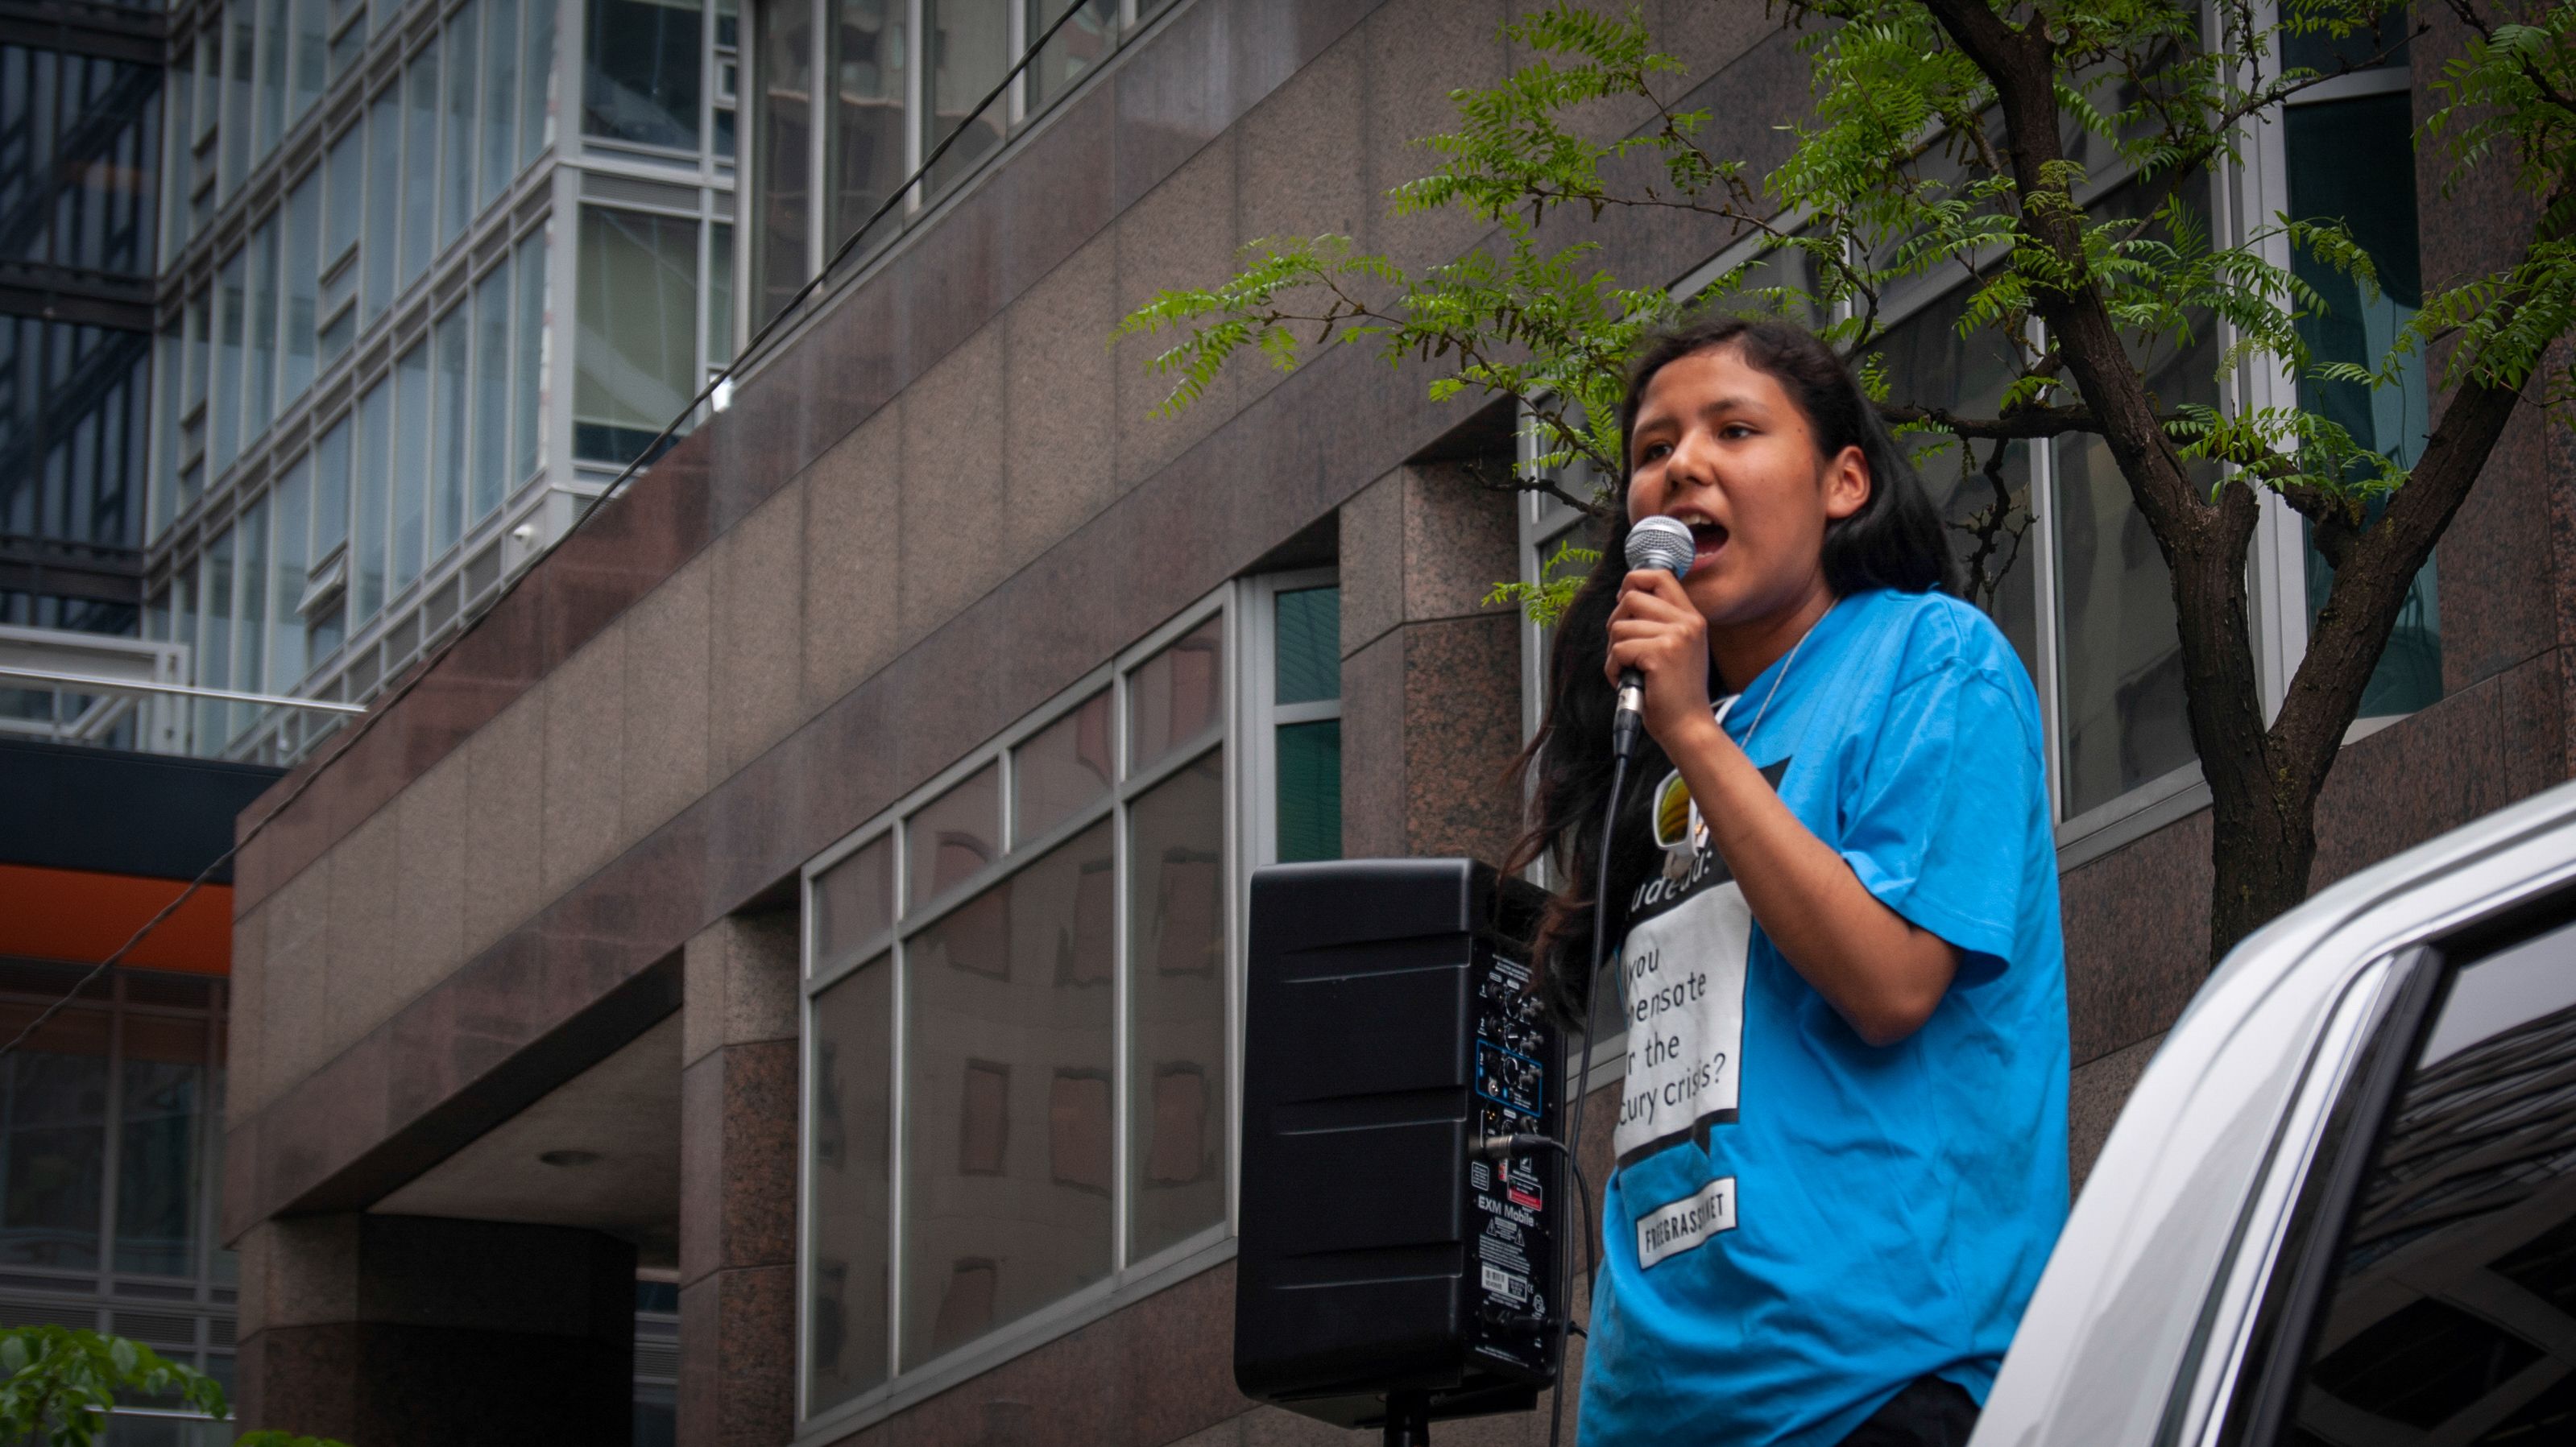 Paris Meekis, a Grassy Narrows teen, stands before the gathered crowd and speaks passionately about her community. Canada, 2019. Image by Shelby Gilson.